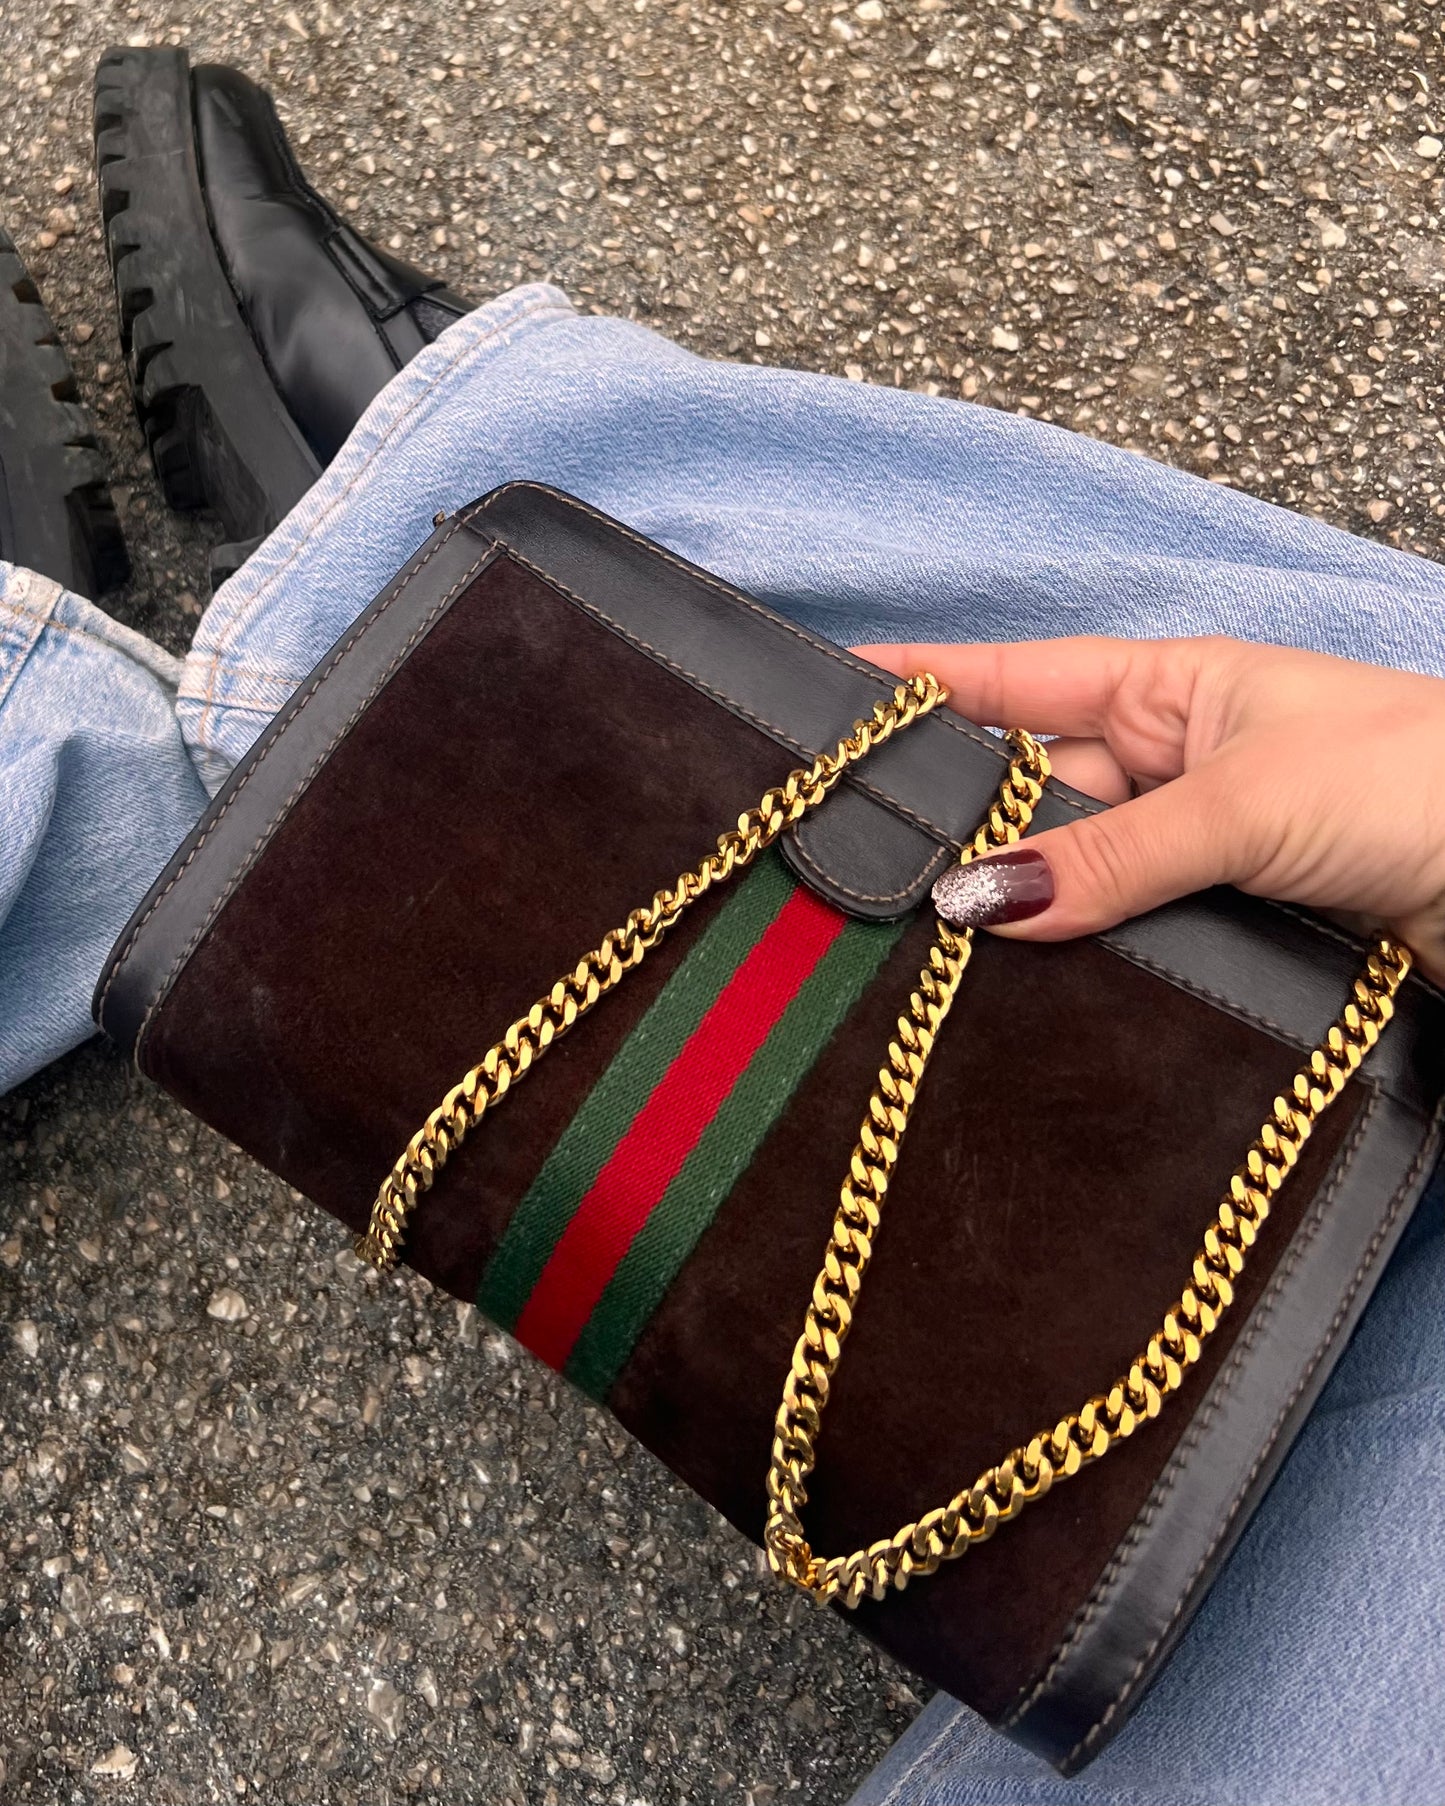 Gucci Ophidia vintage